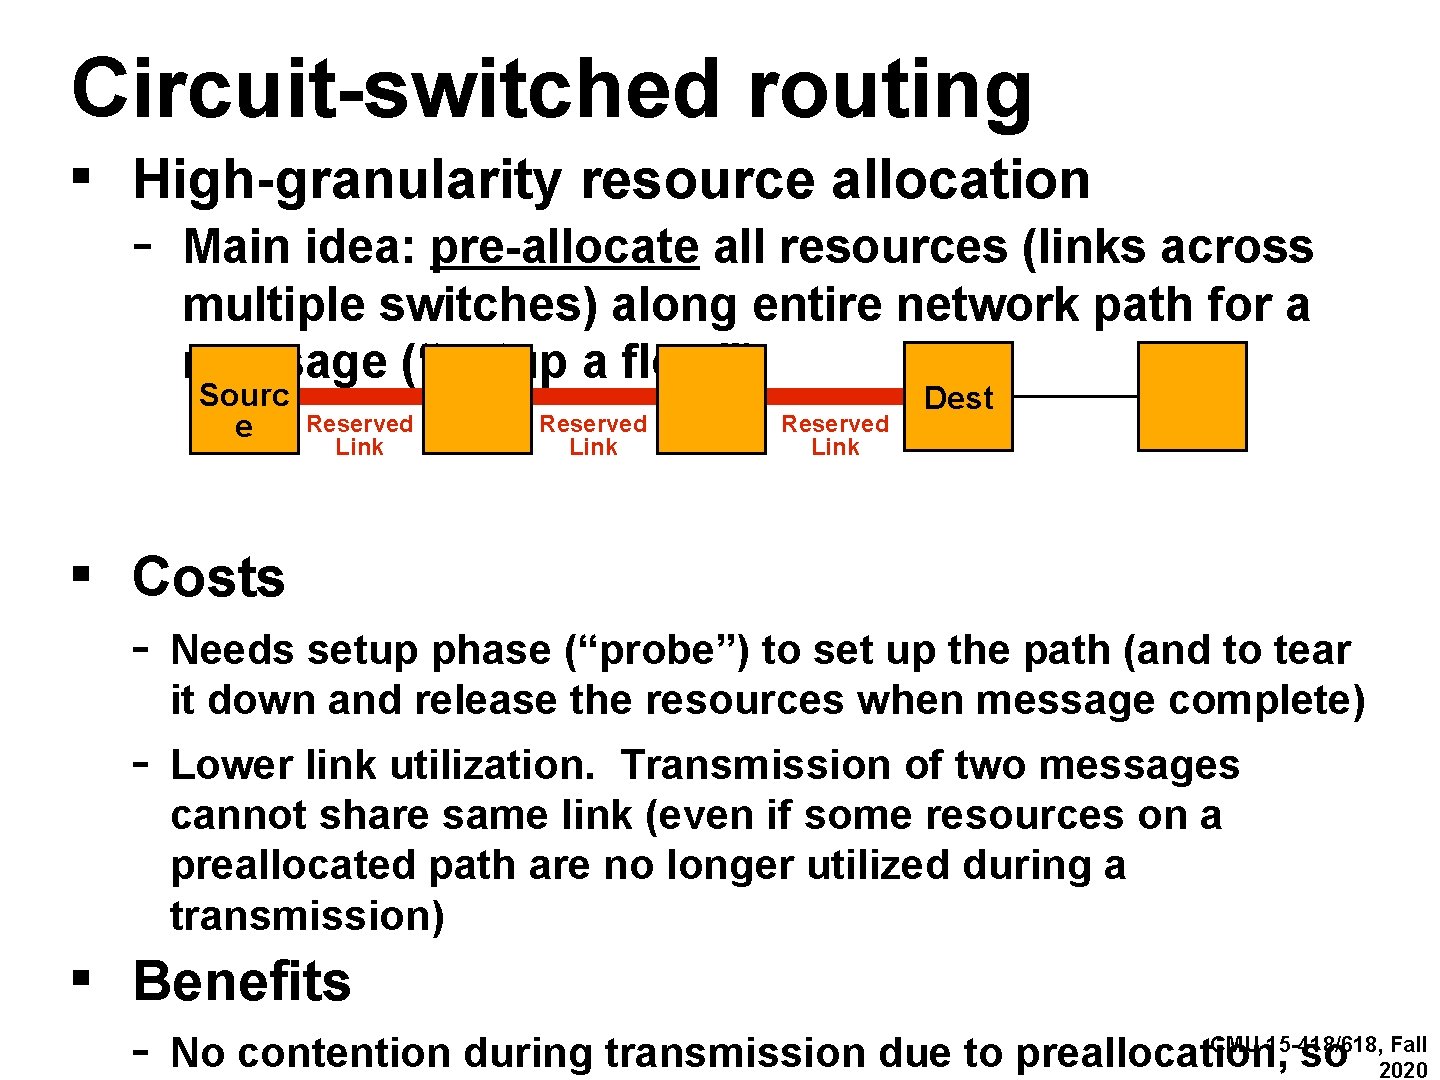 Circuit-switched routing ▪ High-granularity resource allocation - Main idea: pre-allocate all resources (links across